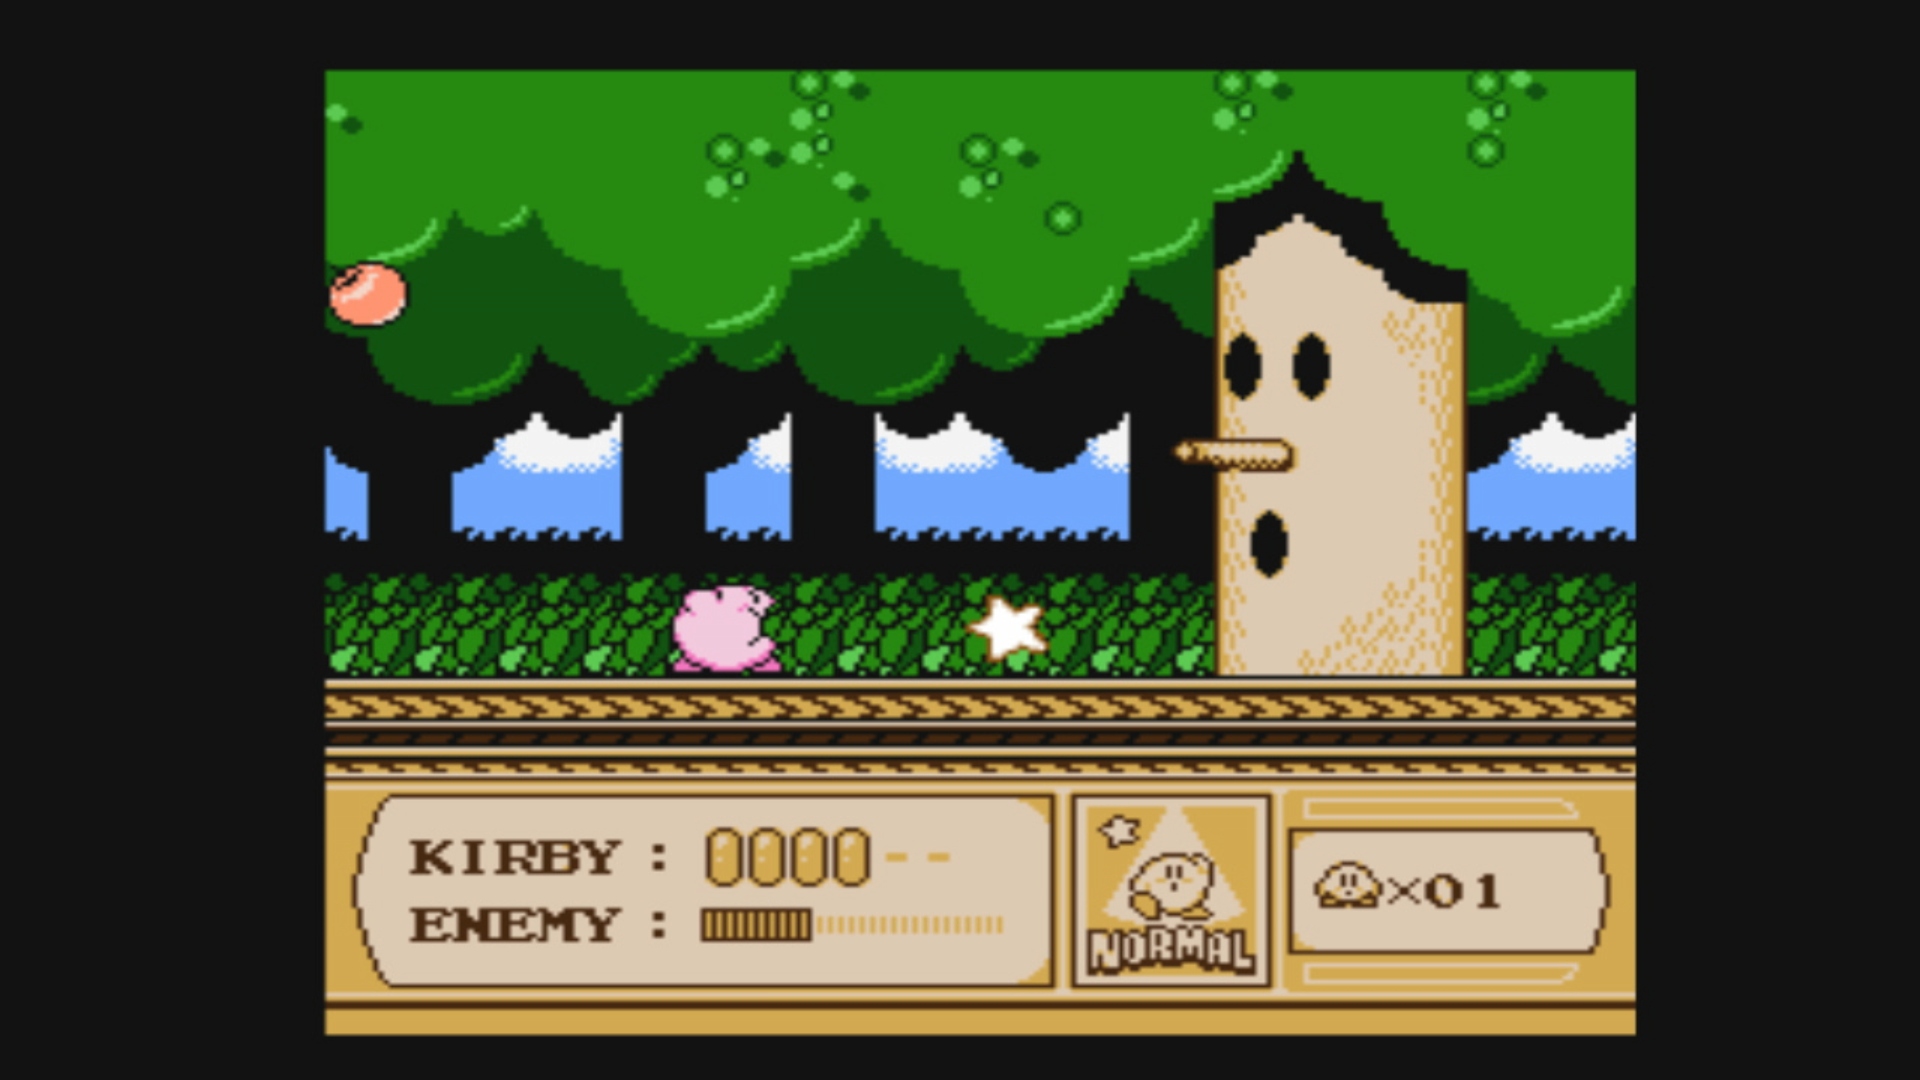 Best Kirby games: Kirby's Adventure. Image shows Kirby in a boss battle against Whispy Woods.